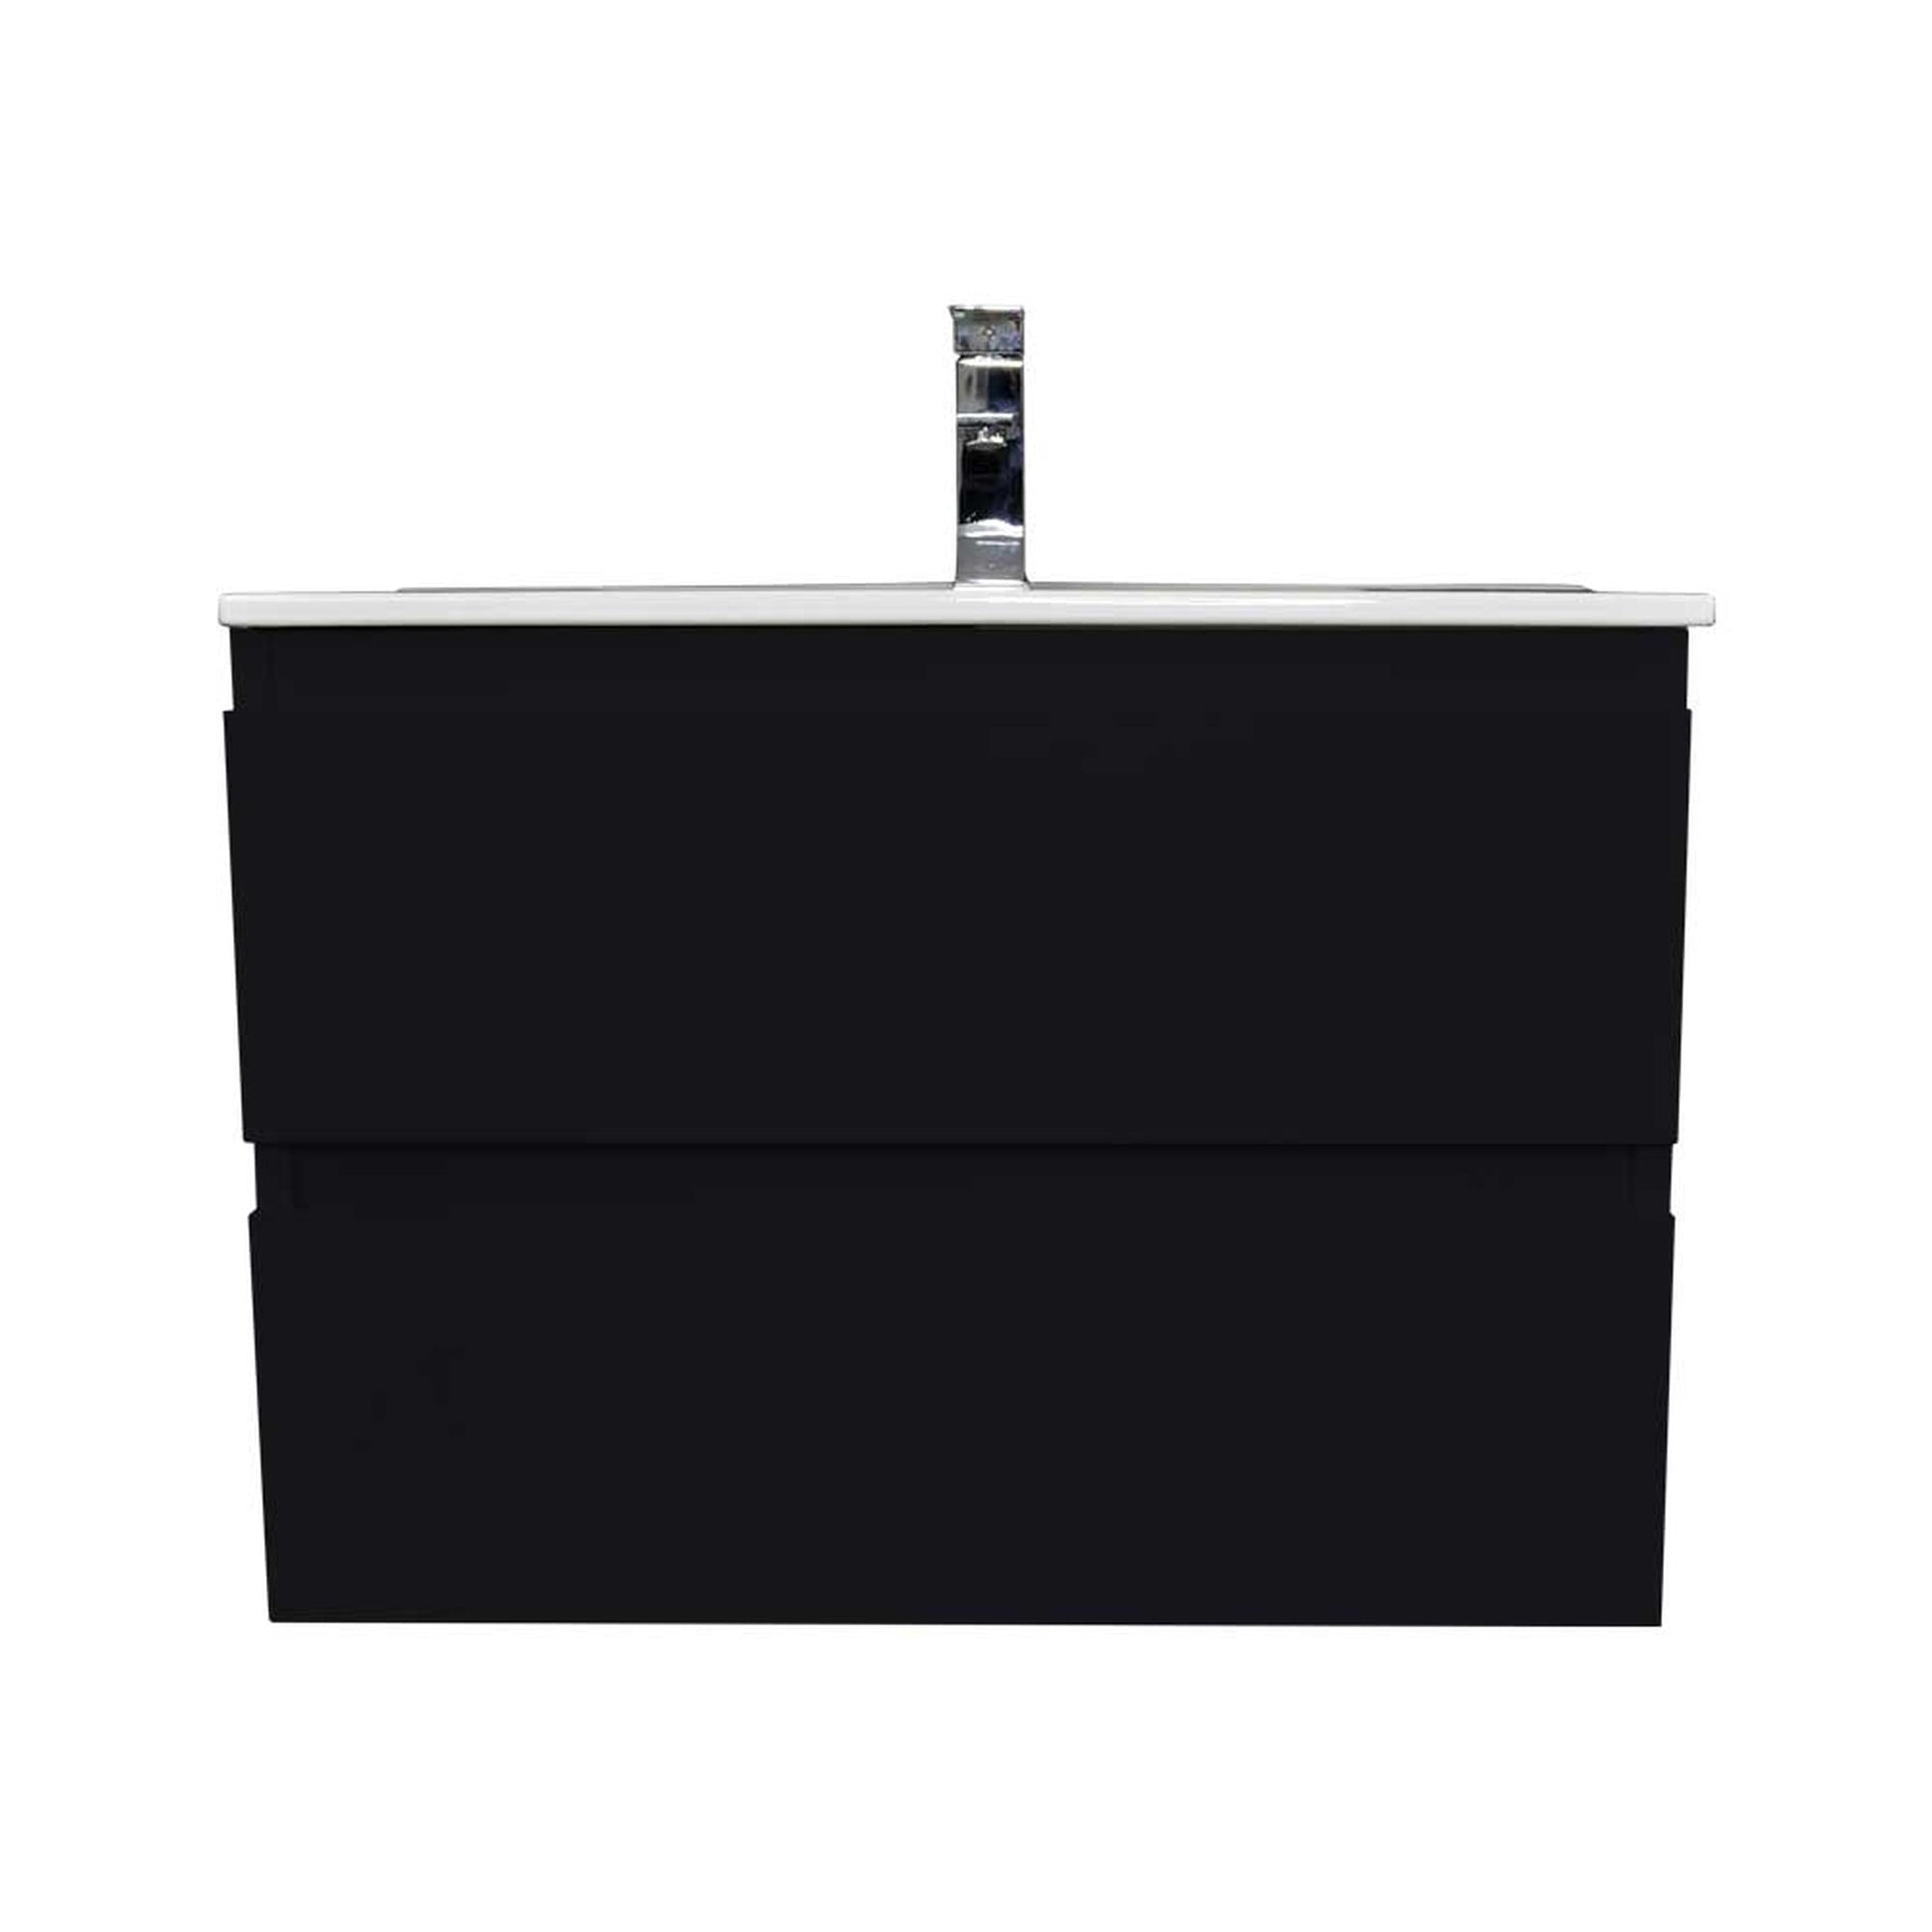 Volpa USA Salt 30" x 18" Glossy Black Wall-Mounted Floating Bathroom Vanity With Drawers, Integrated Porcelain Ceramic Top and Integrated Ceramic Sink